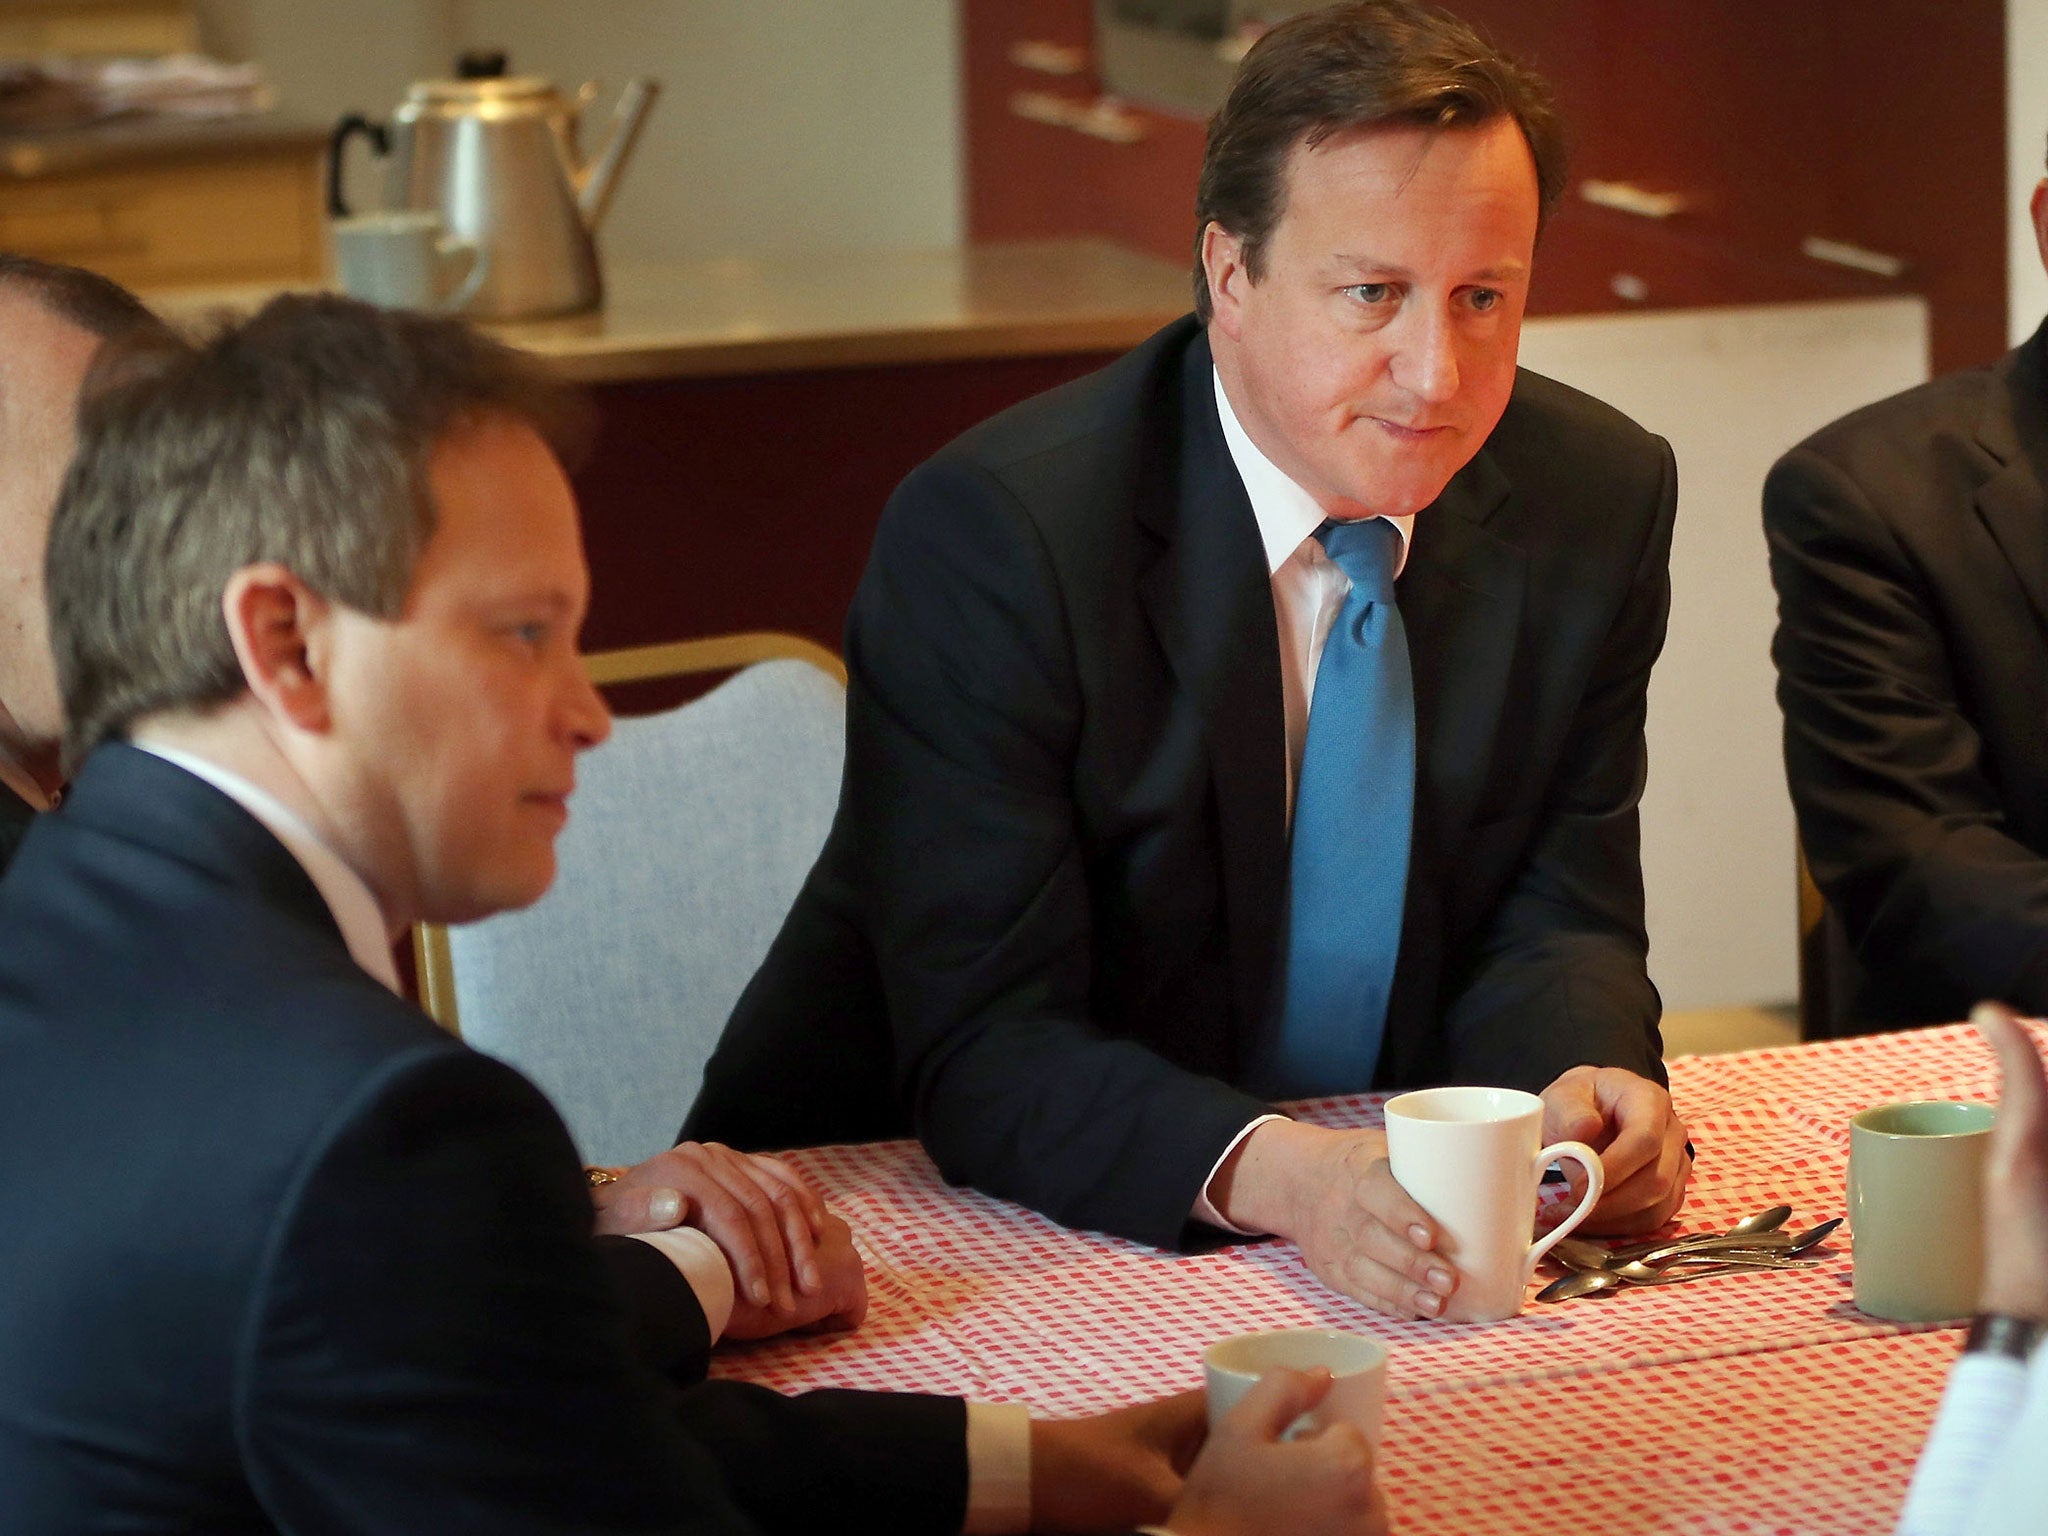 Grant Shapps in a meeting with Prime Minister David Cameron as housing minister in 2012